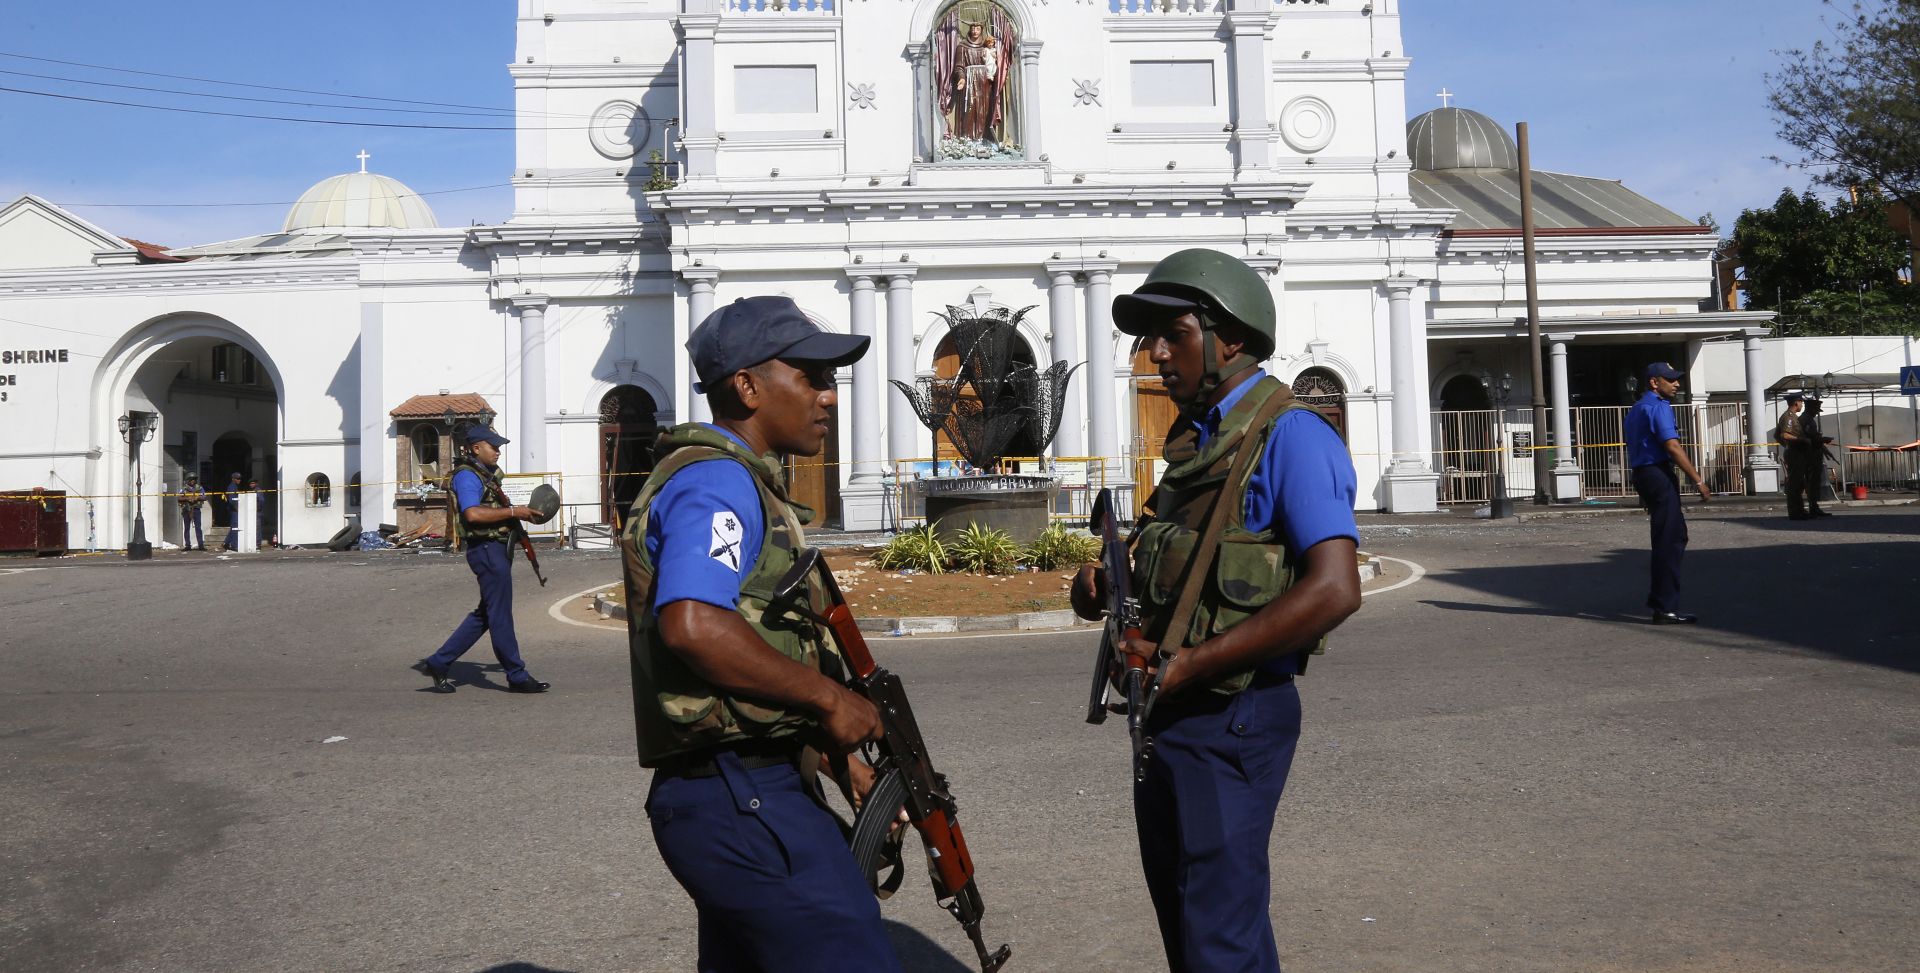 epa07520915 Sri Lankan security personal stand guard outside St. Anthony's Church in Kochchikade, Colombo, Sri Lanka, 22 April 2019. According to news reports, at least 290 people have been killed and over 500 injured in a series of blasts during Easter Sunday service at churches and hotels across Colombo on 21 April.   EPA/M.A. PUSHPA KUMARA